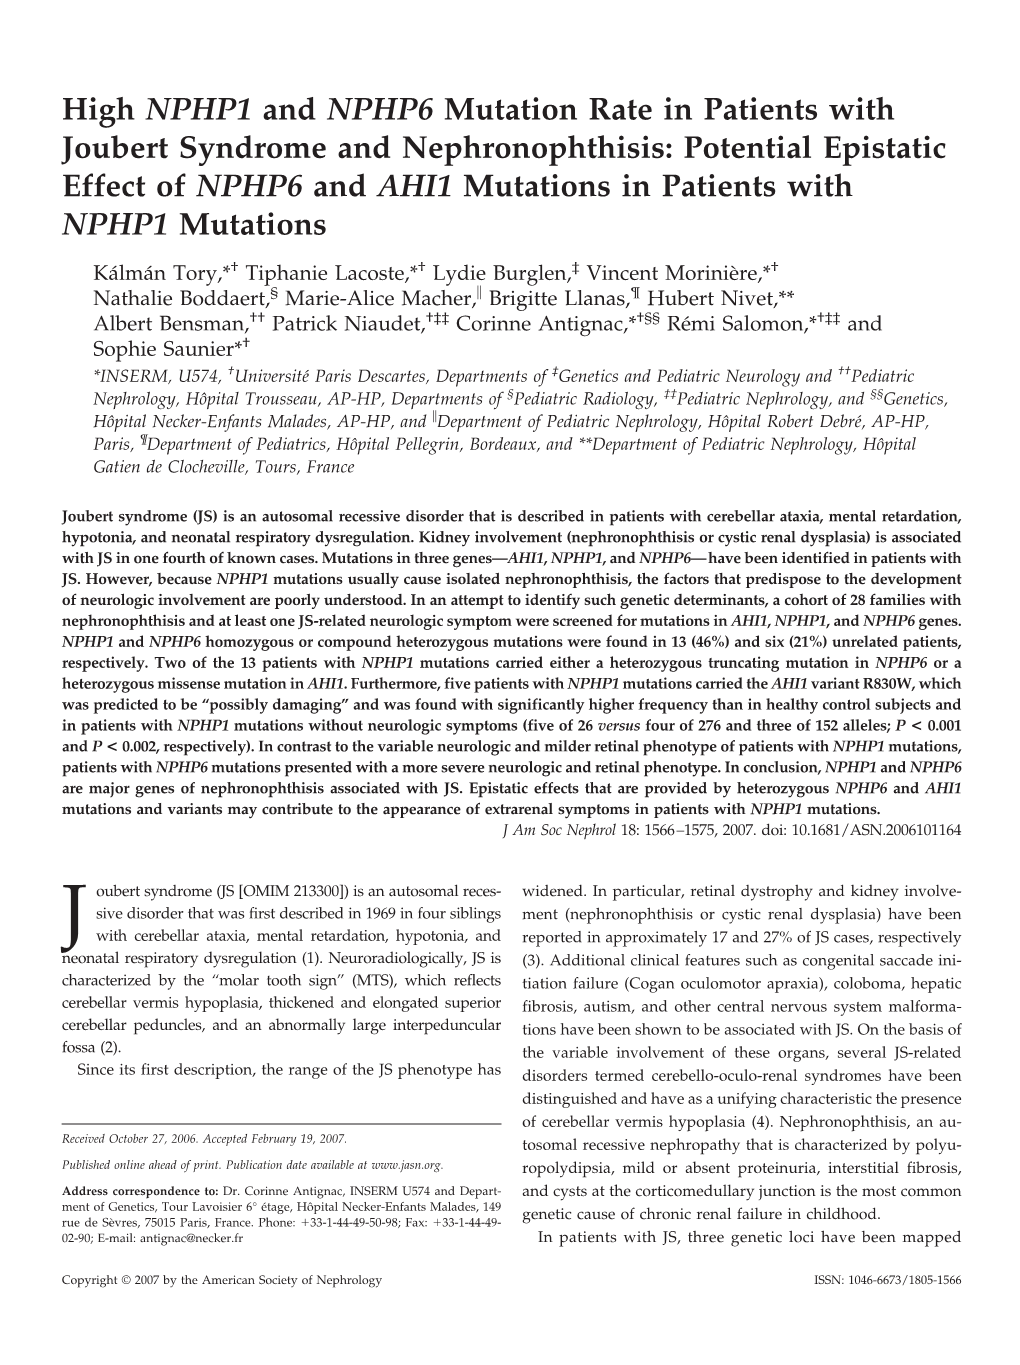 High NPHP1 and NPHP6 Mutation Rate in Patients With